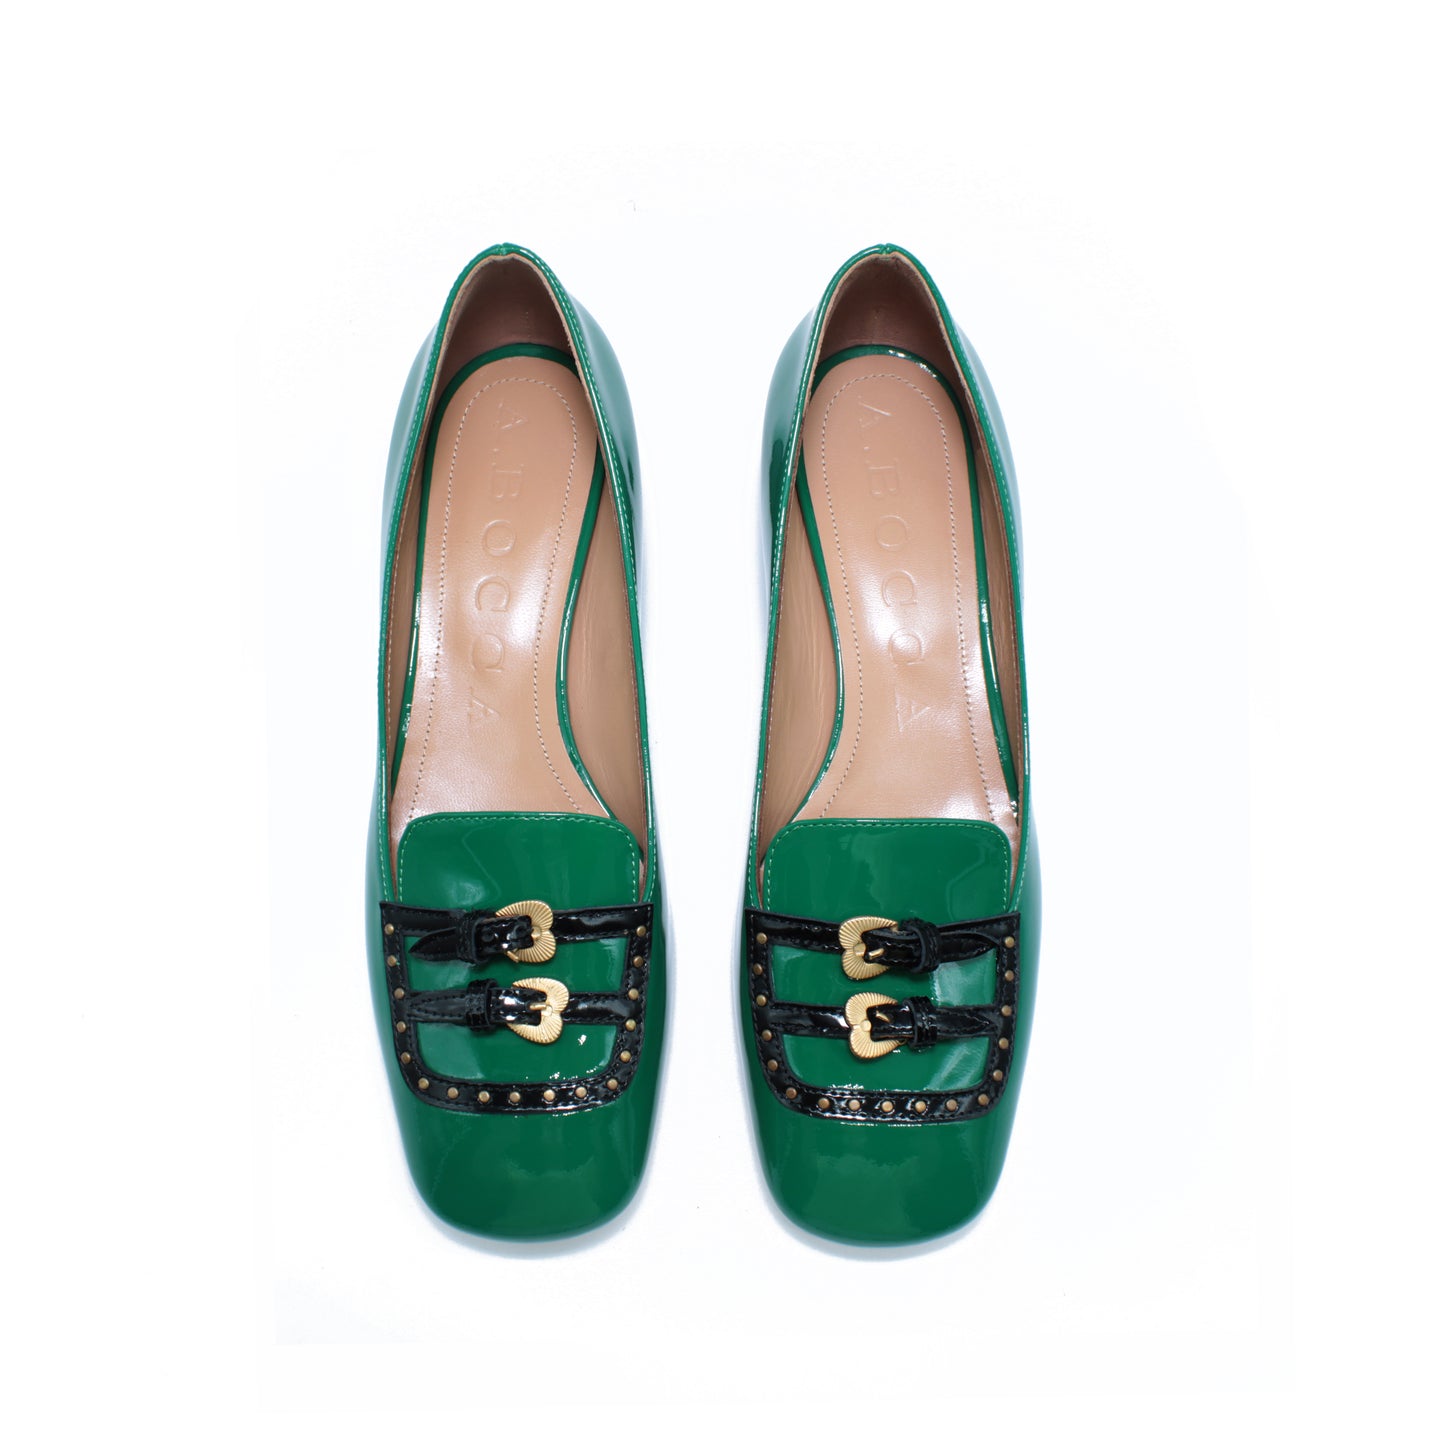 Moccasin in forest-colored patent leather